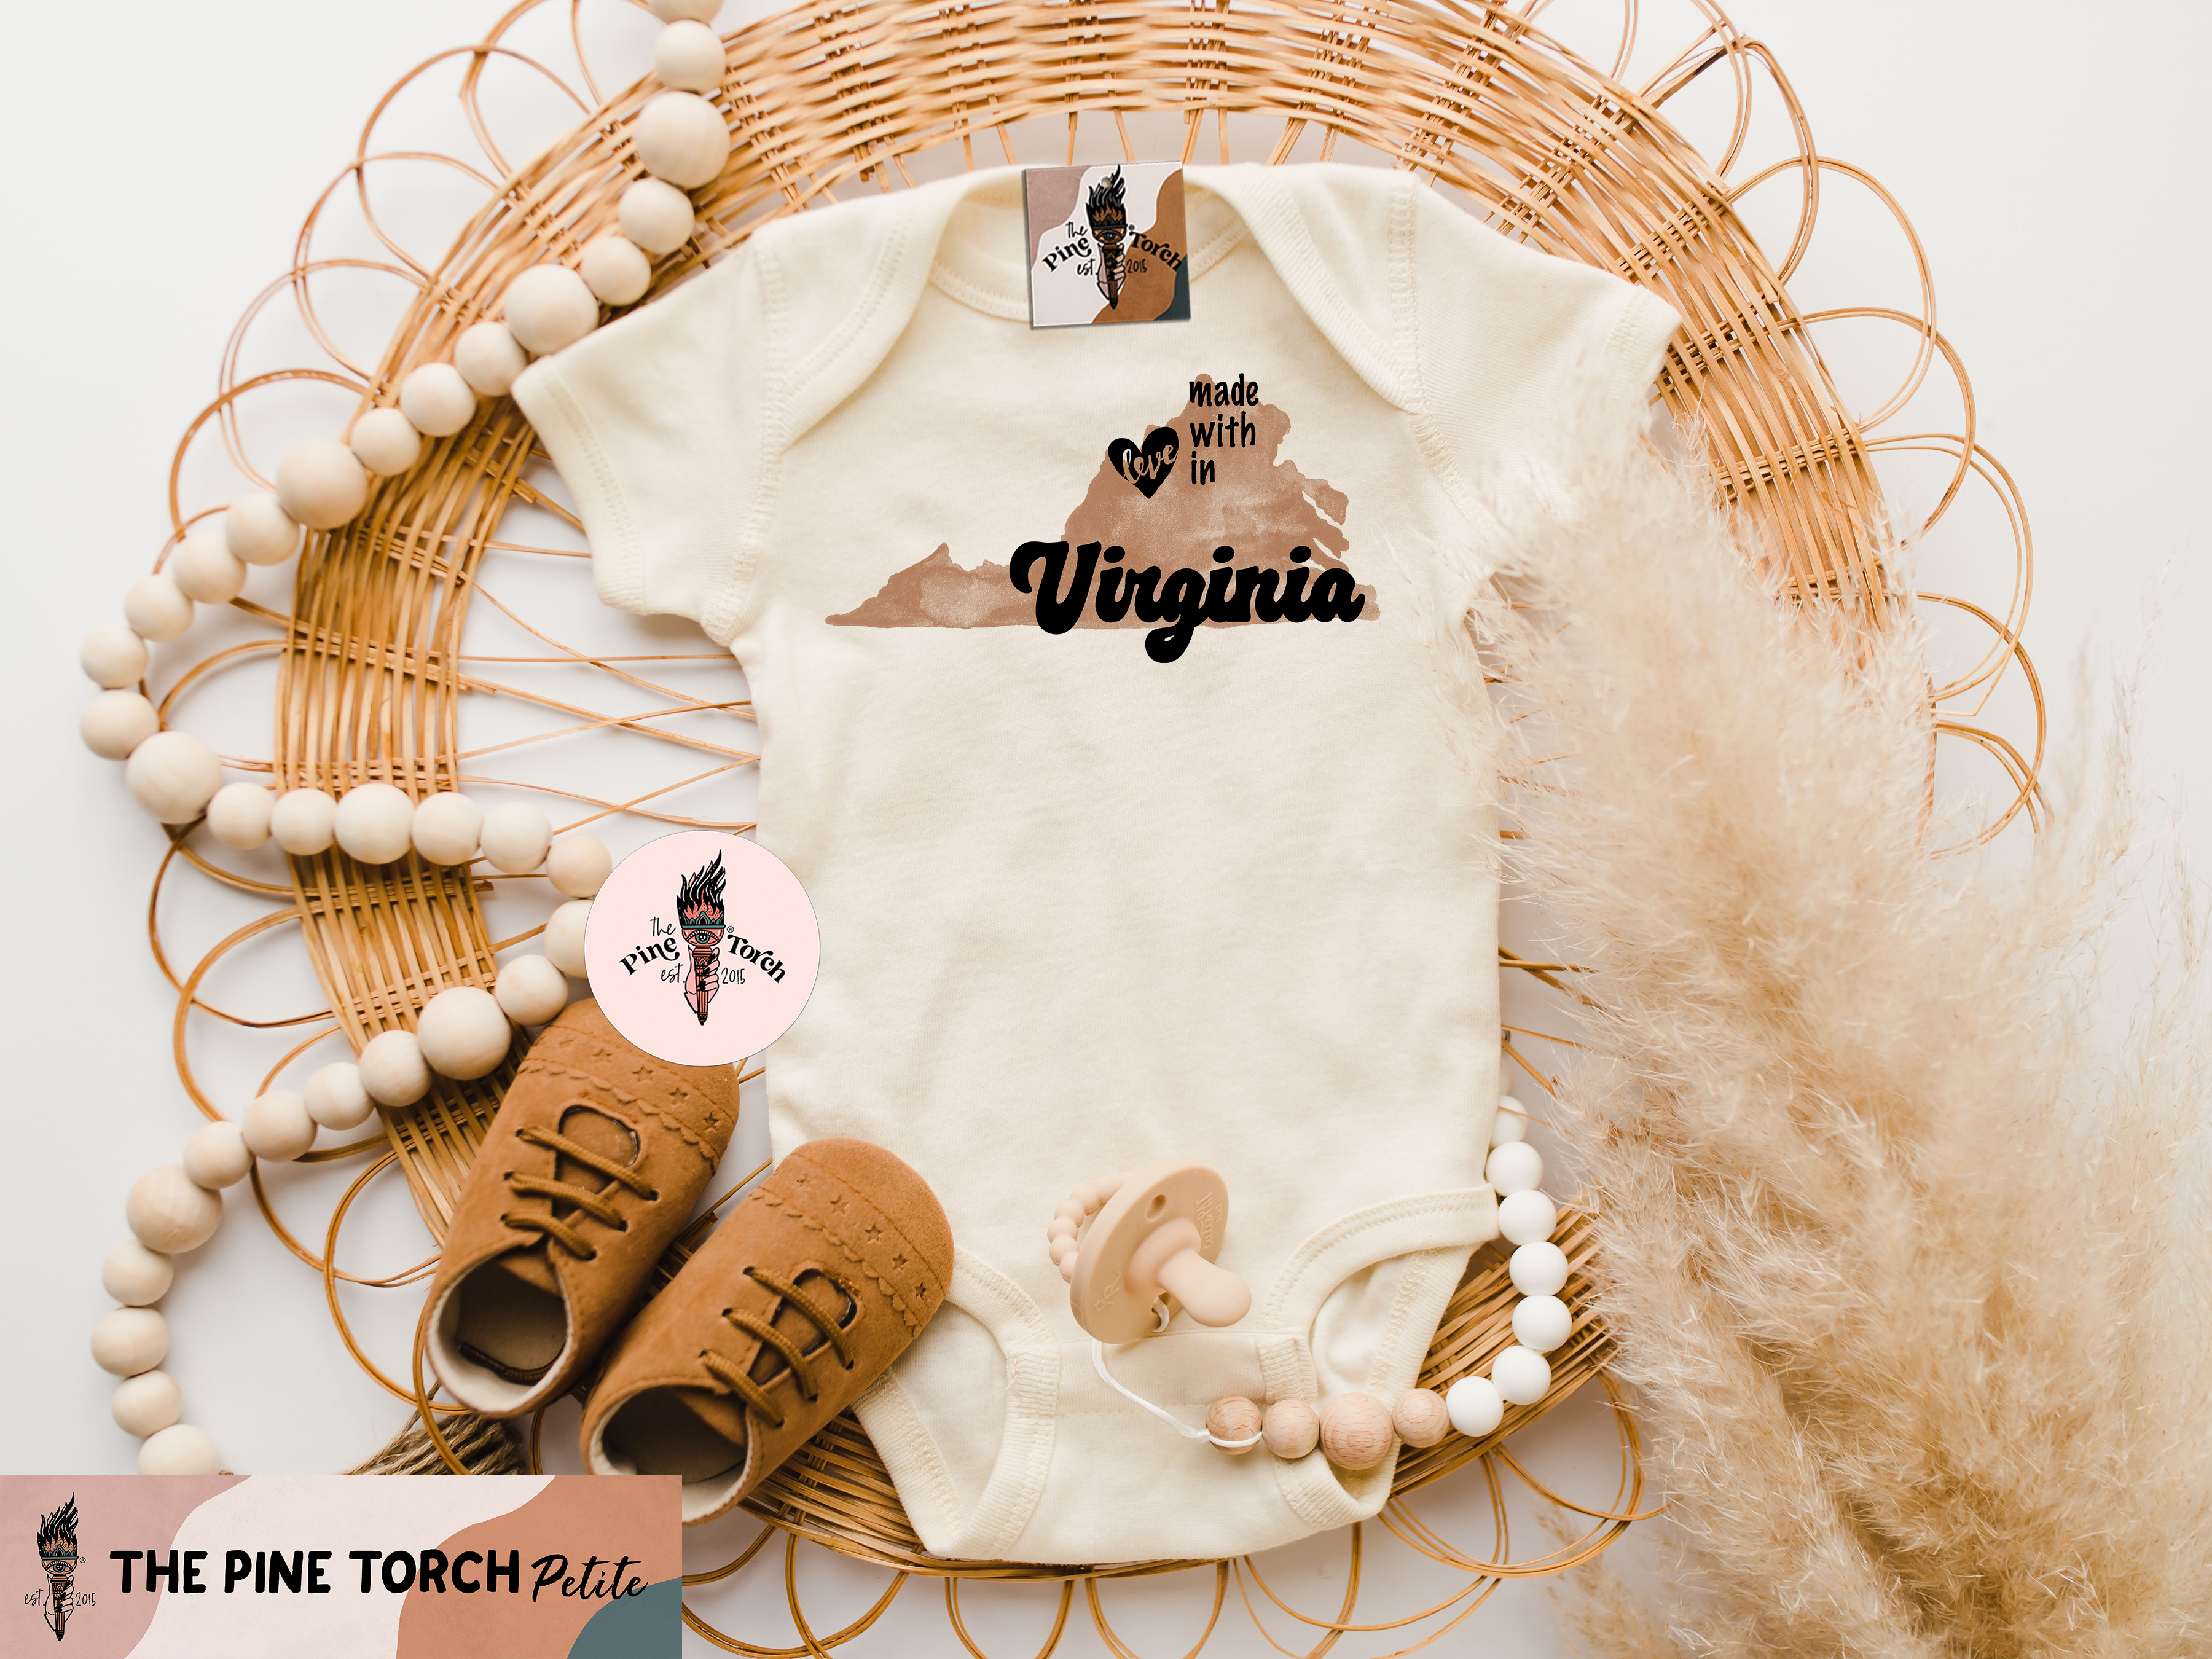 « MADE WITH LOVE IN VIRGINIA » BODYSUIT